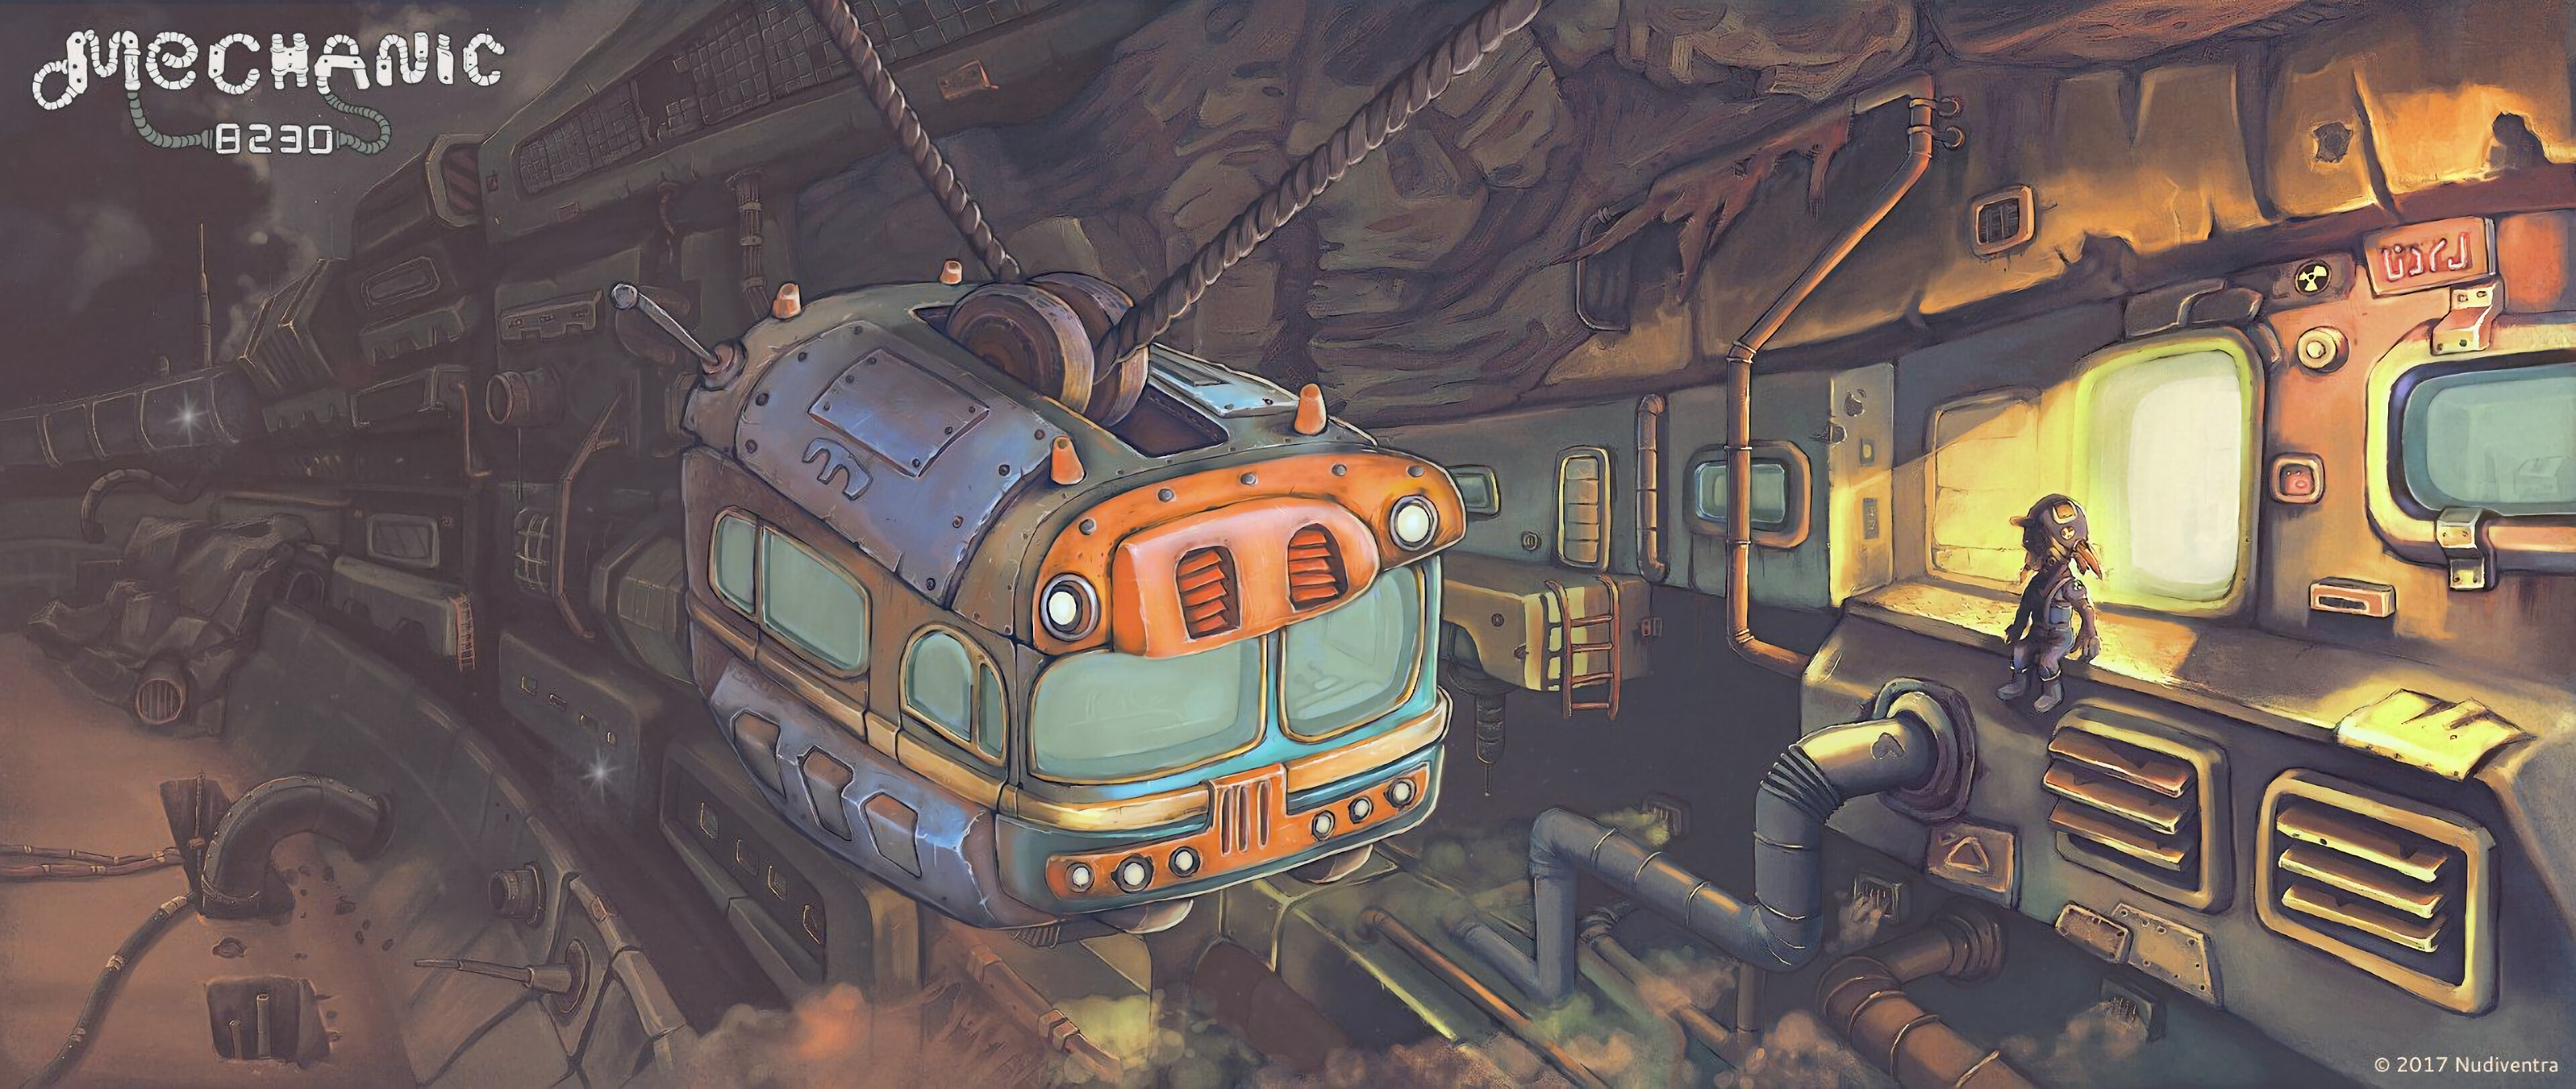 Mechanic 8230 (Game): An adventure game in the point-and-click genre. 3840x1630 Dual Screen Wallpaper.